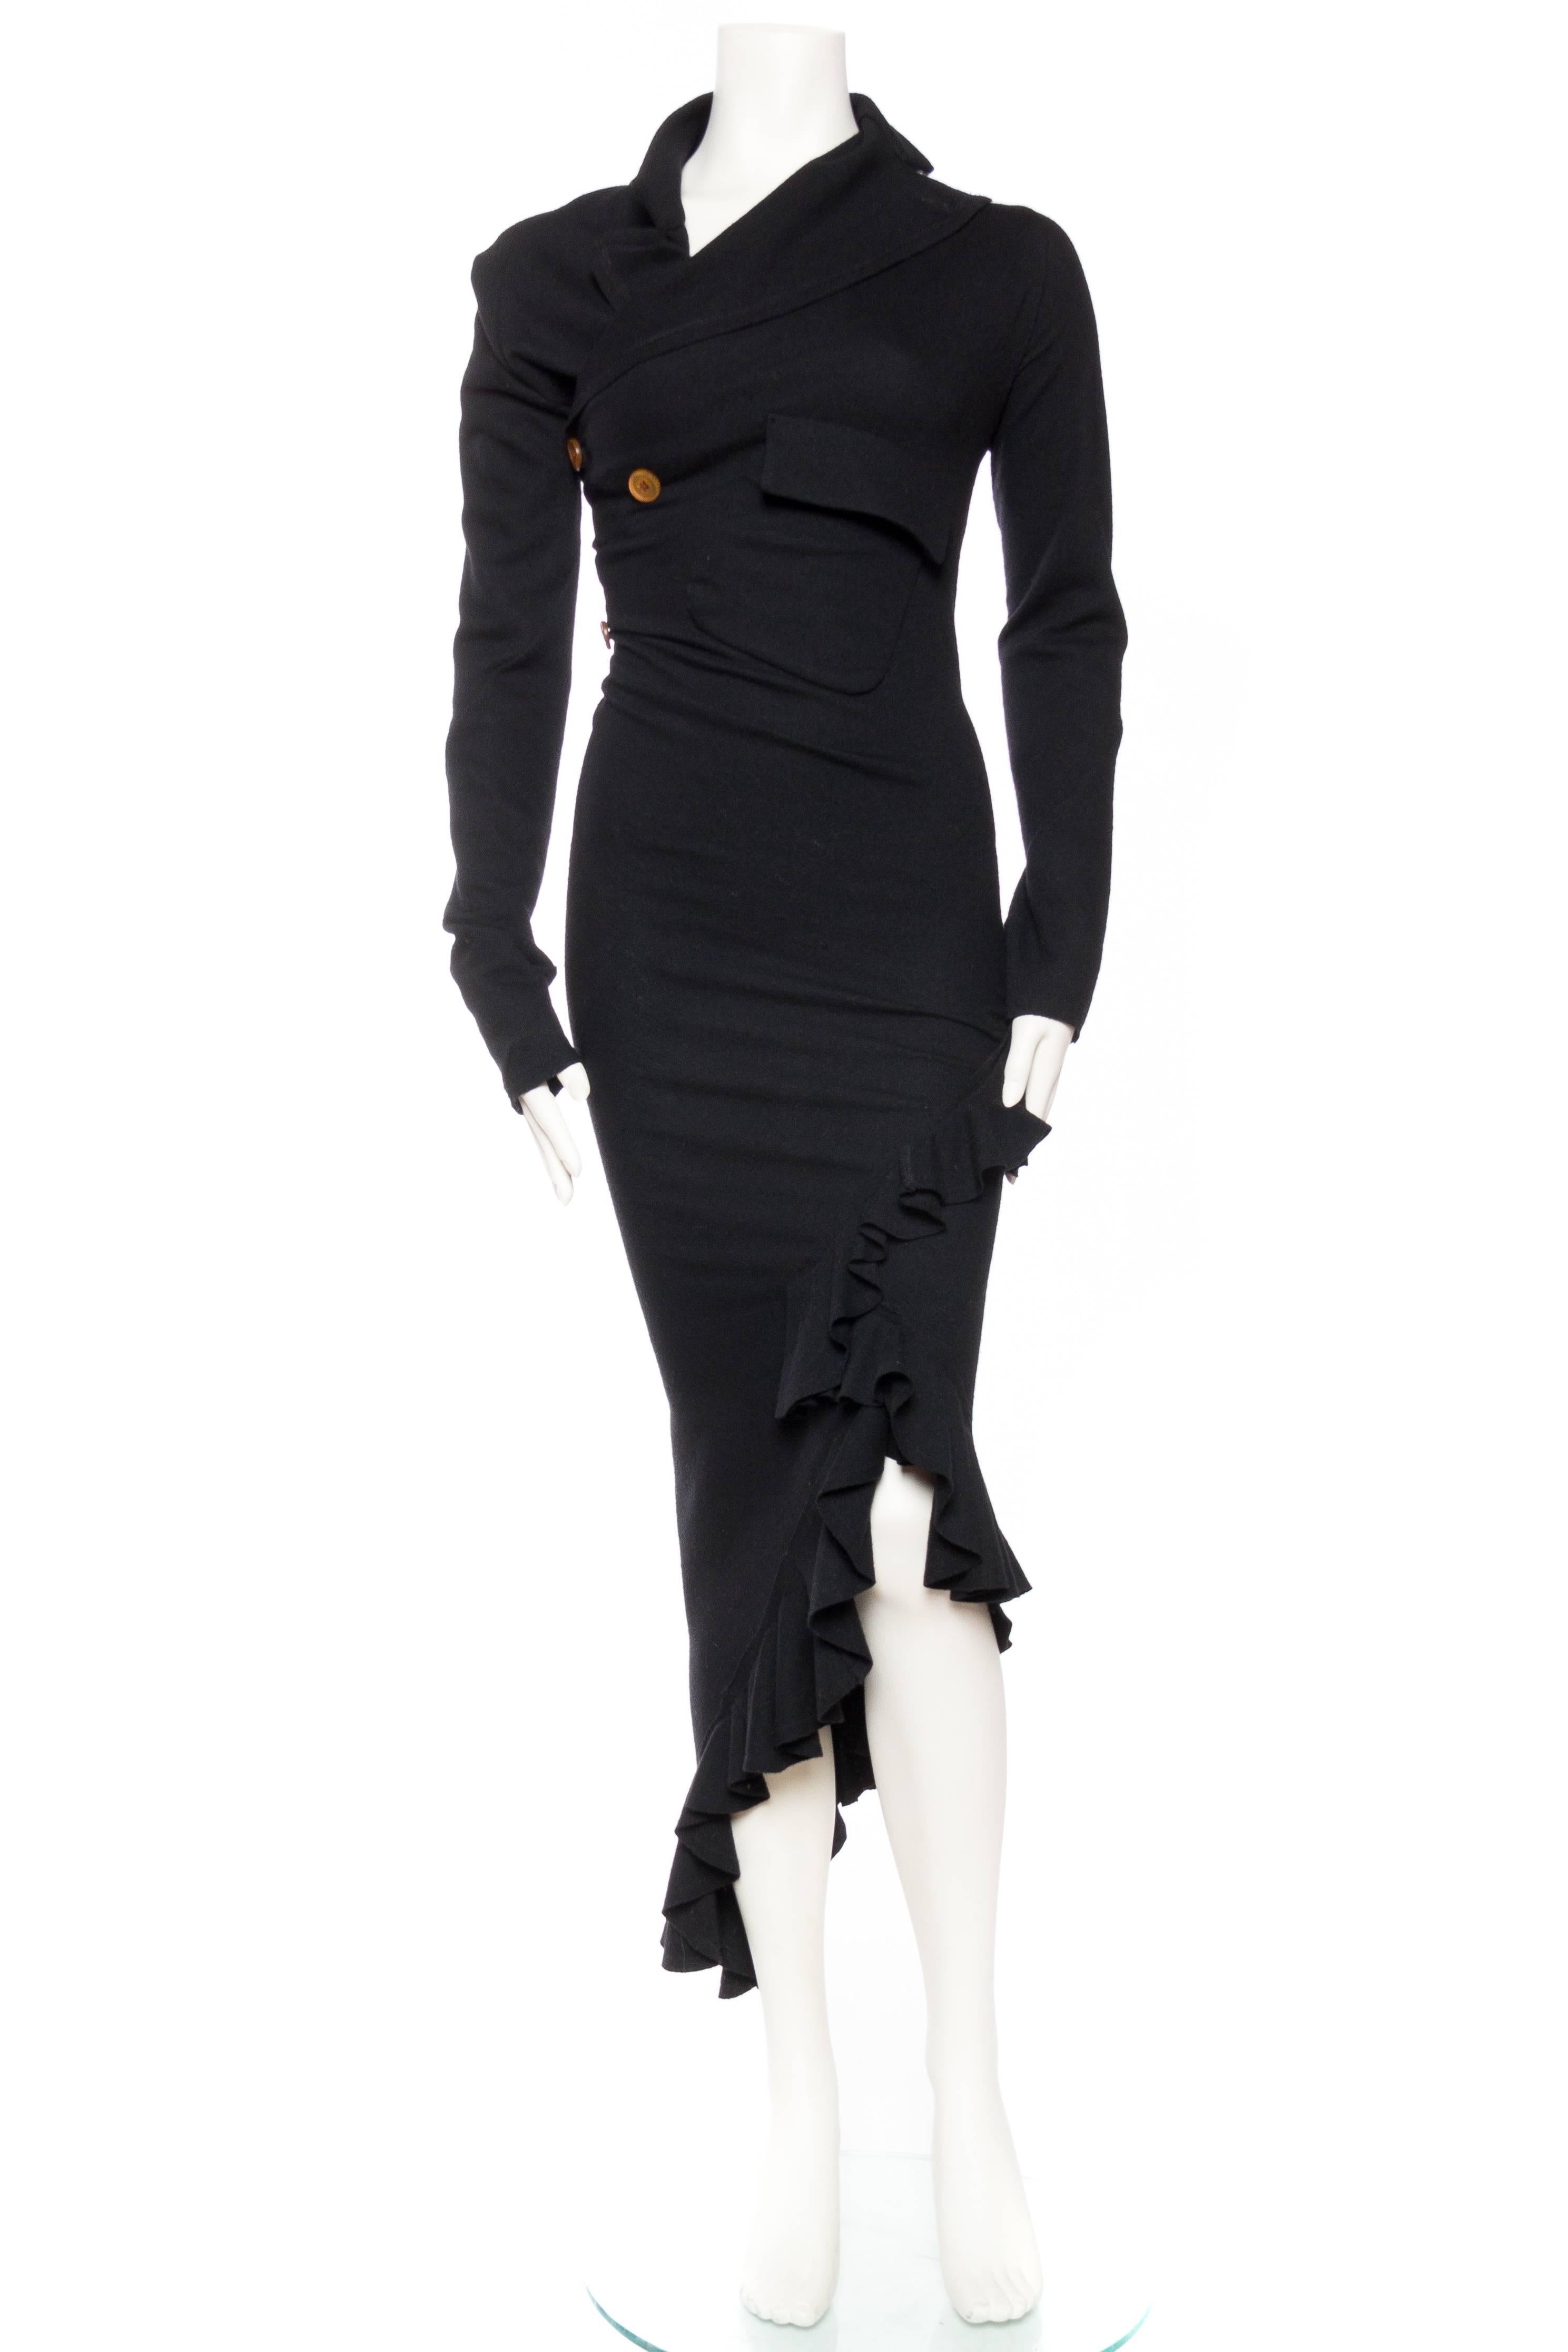 From around the time of the iconic "Bumps and Lumps" collection, this dress shows all the right curves. Shockingly sensual and alluring for Rei Kawakubo this dress has almost an Alaia vibe to it with the body hugging fit. The asymmetrical